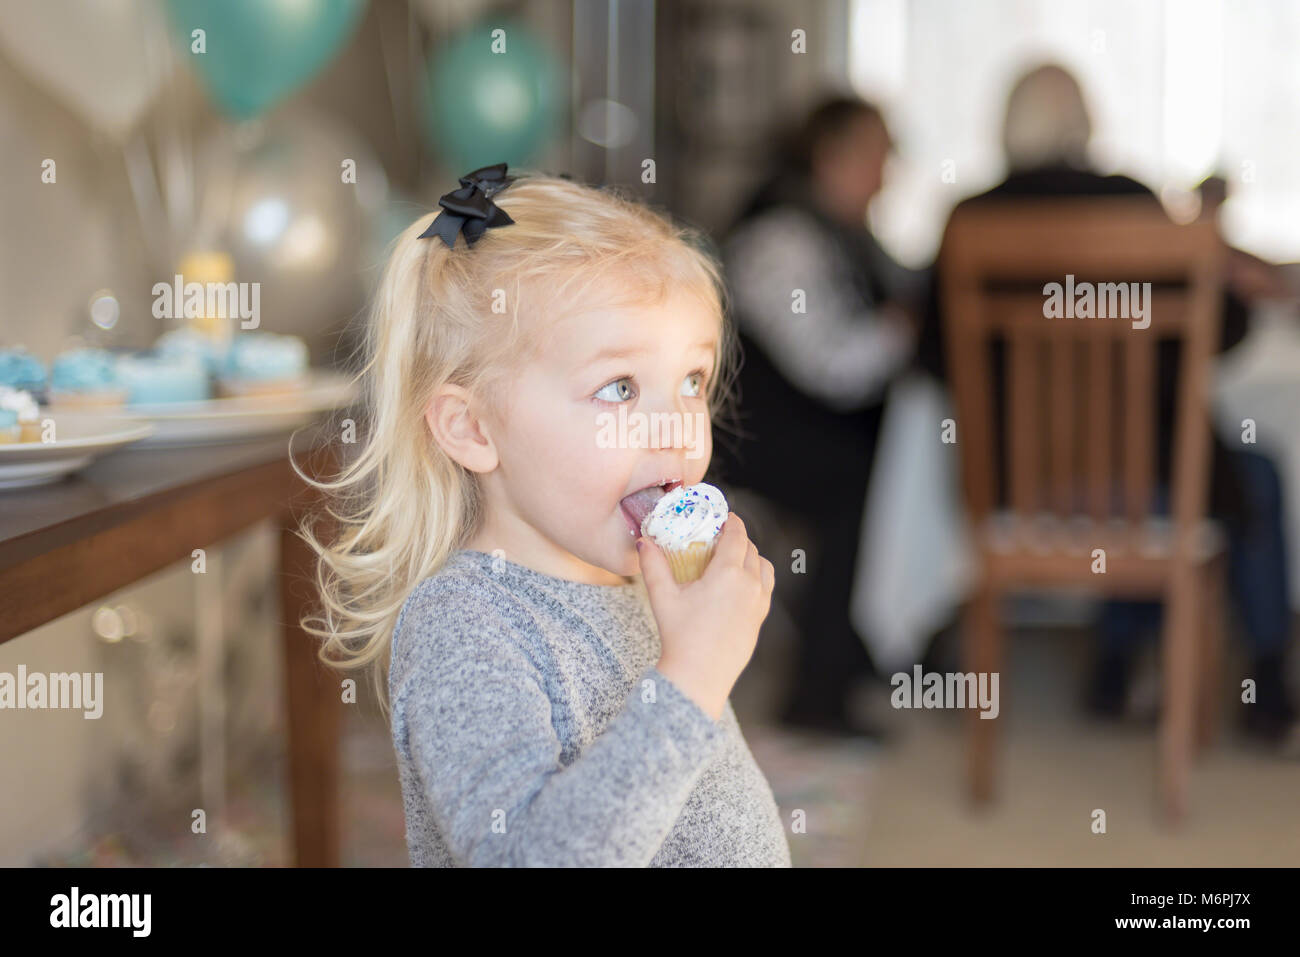 young girl at family birthday party eating a cupcake Stock Photo